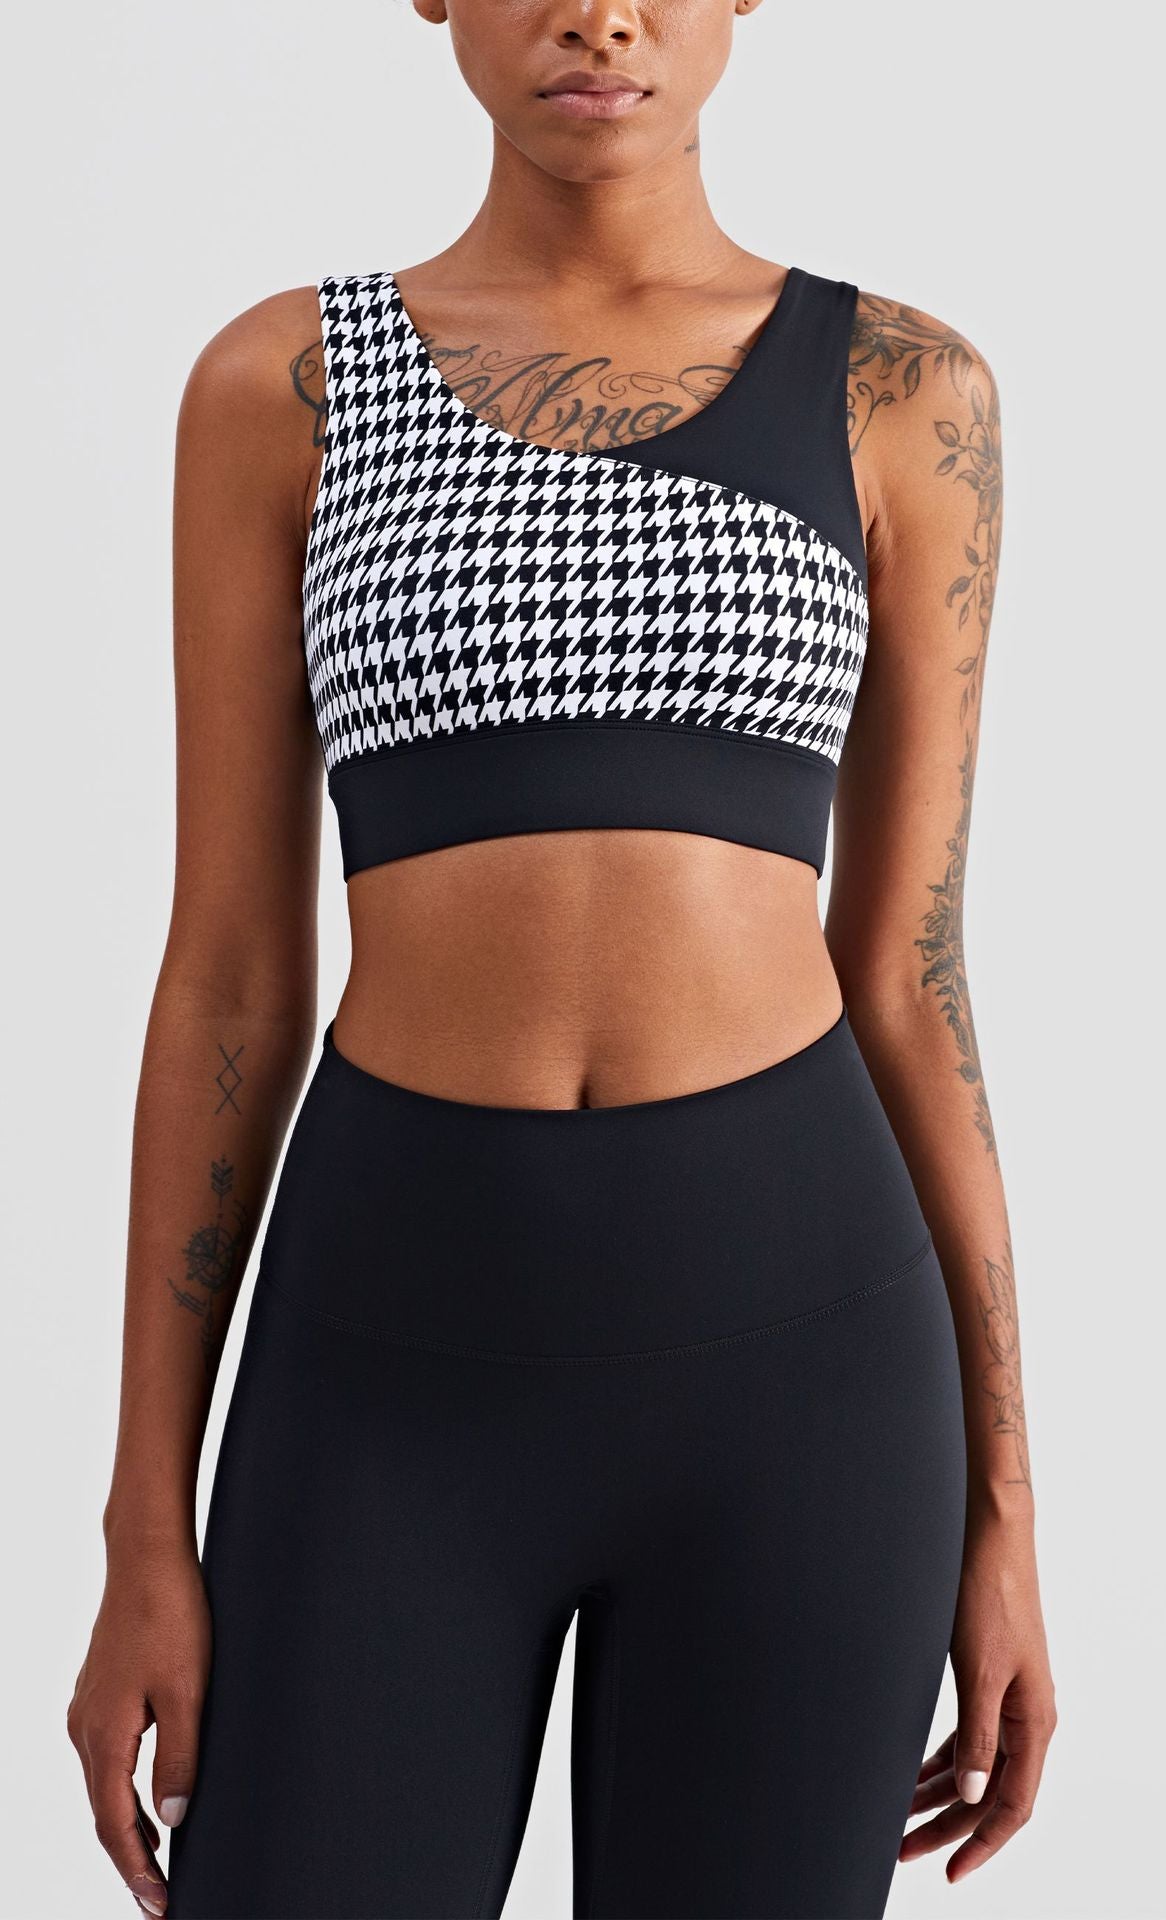 Houndstooth Nude Yoga Suit